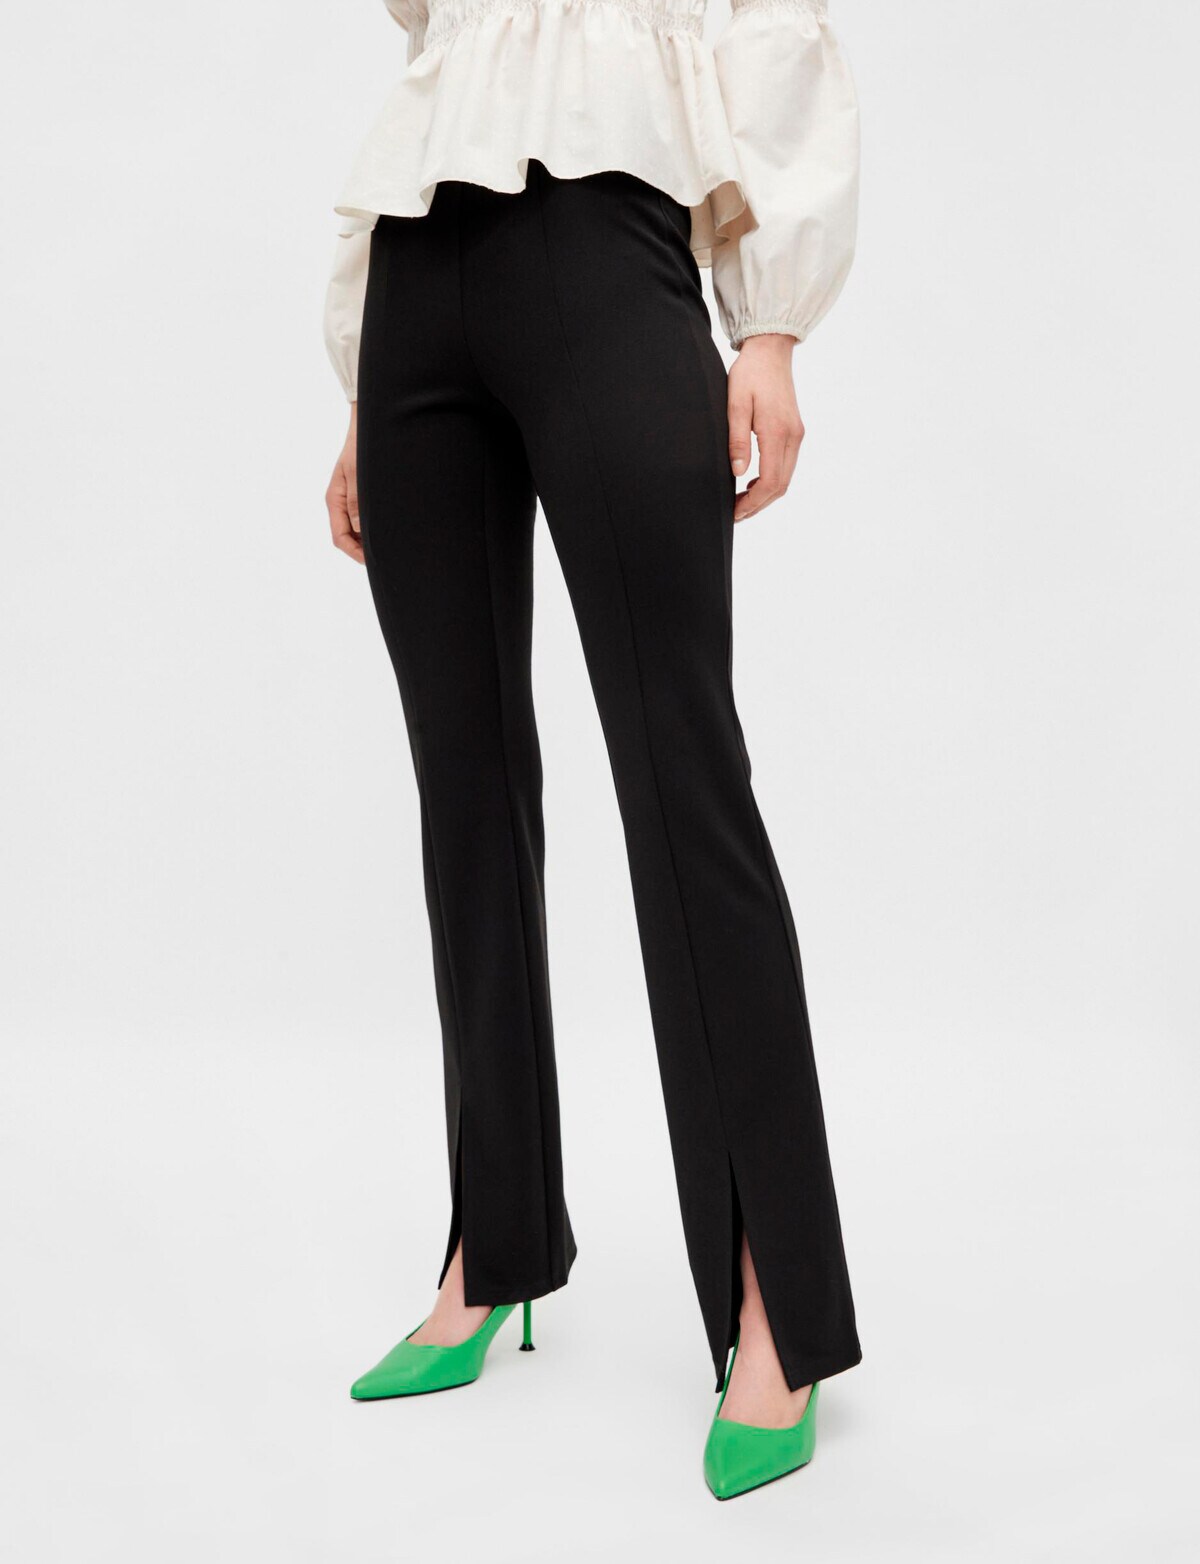 Lady Suit Pants Long Trousers Flare Bell Bottom Front Slit Black Stretchy  Formal | eBay